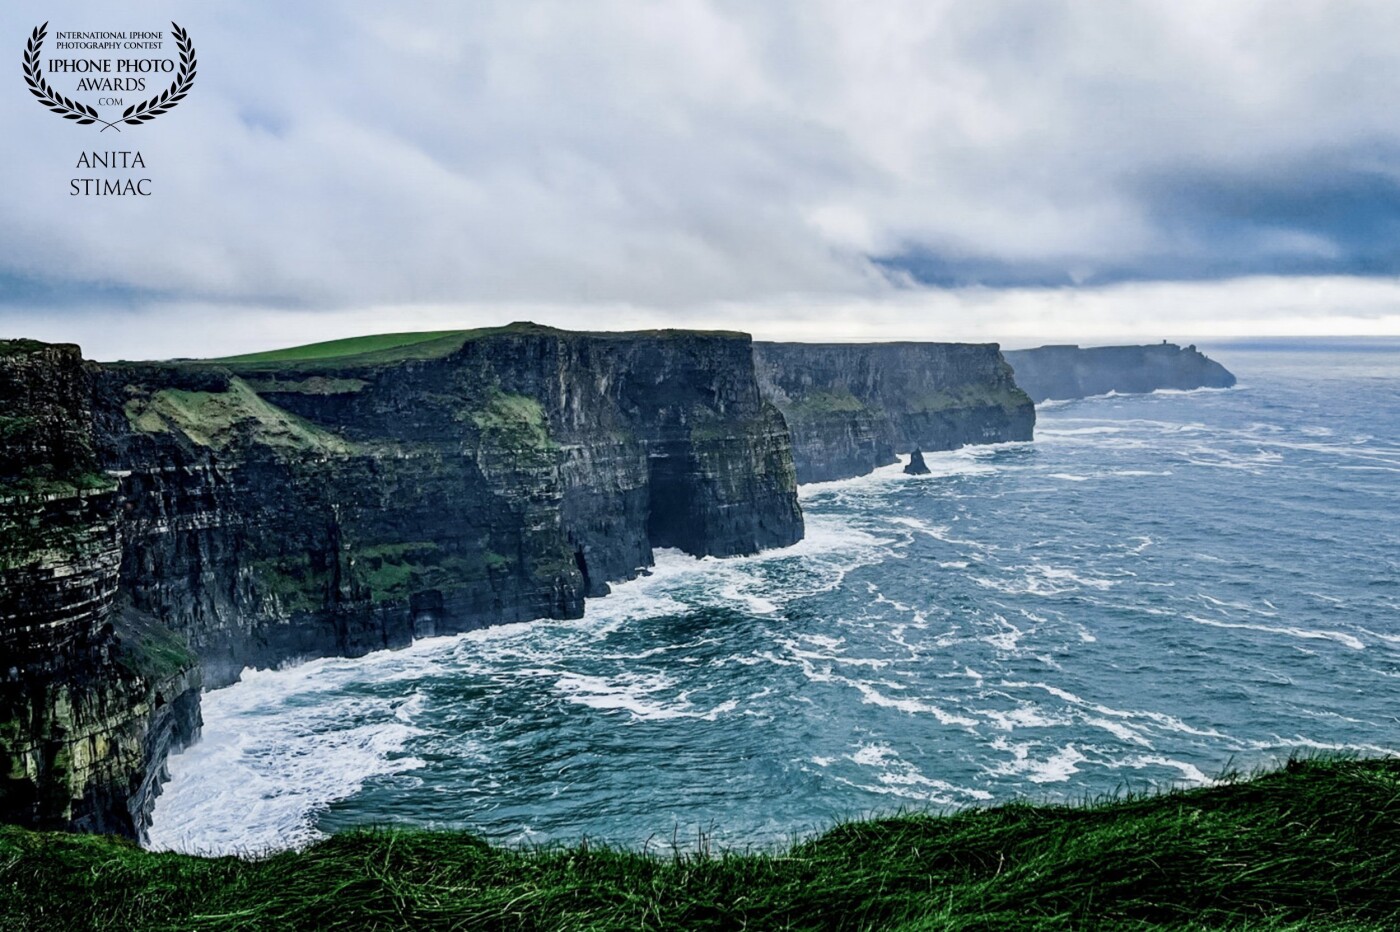 “To be Irish is to stand tall as the cliffs with a soul as deep as the ocean..” - Irish Proverb<br />
<br />
The Cliffs of Moher is the most famous tourist attraction on the west coast of Ireland.